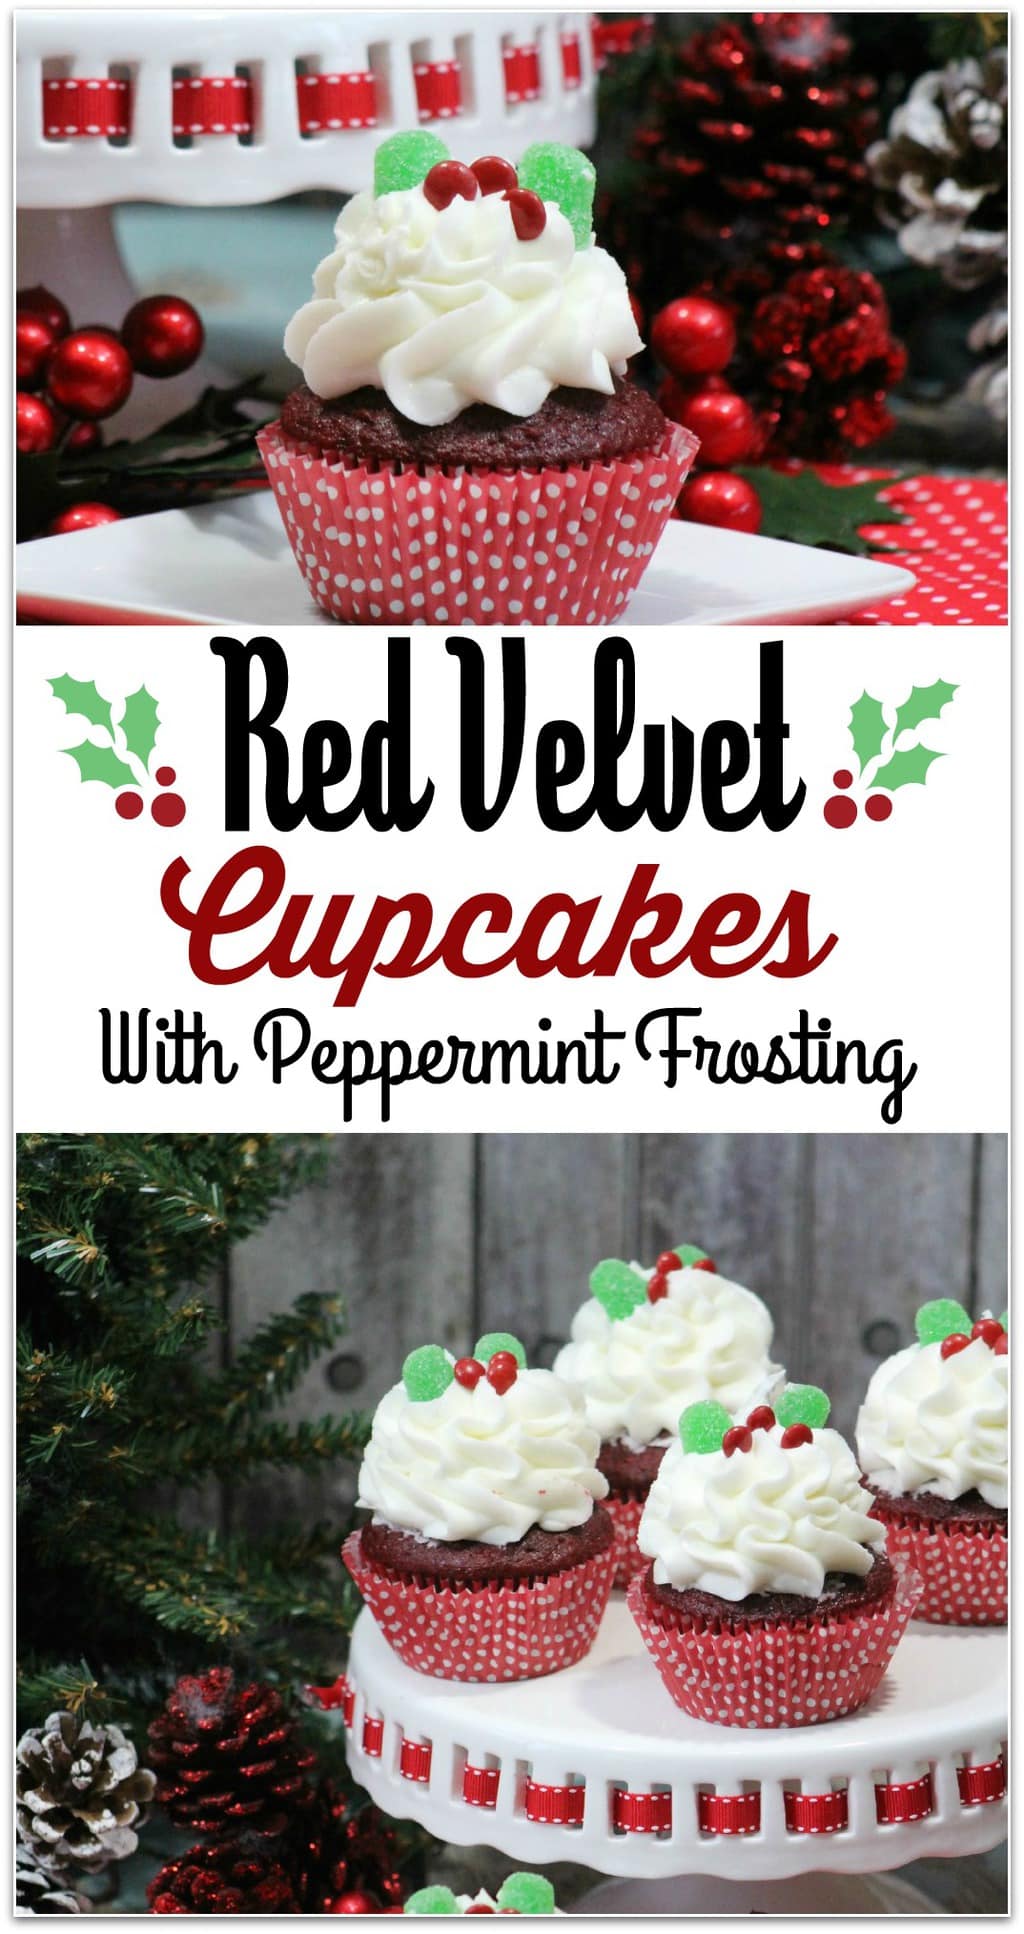 These Holly Red Velvet Cupcakes are so festive, and the perfect dessert to take to a Christmas party! The recipe is easy, so you won't spend hours in the kitchen. You're welcome! This will end up being your go-to holiday dessert recipe!